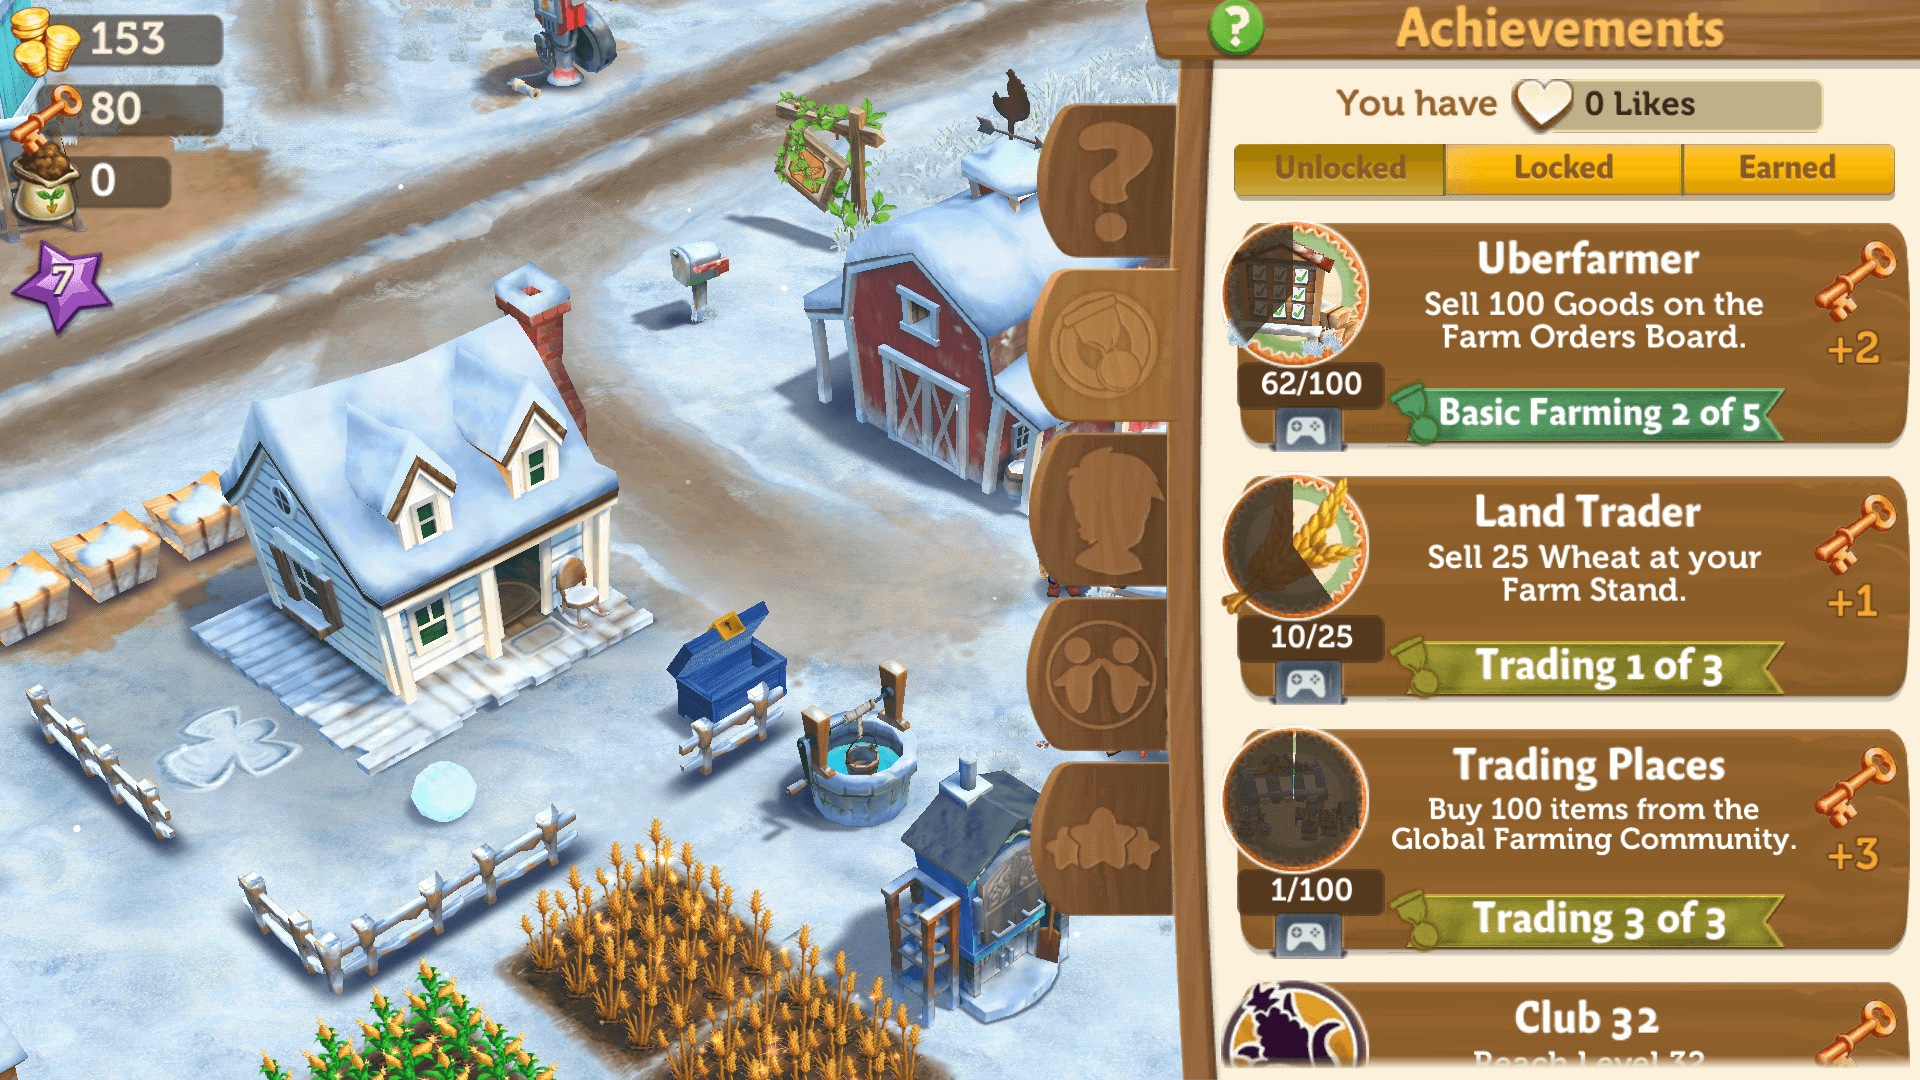 did farmville 2 country escape ta away the 100 keys when you have been away from the game